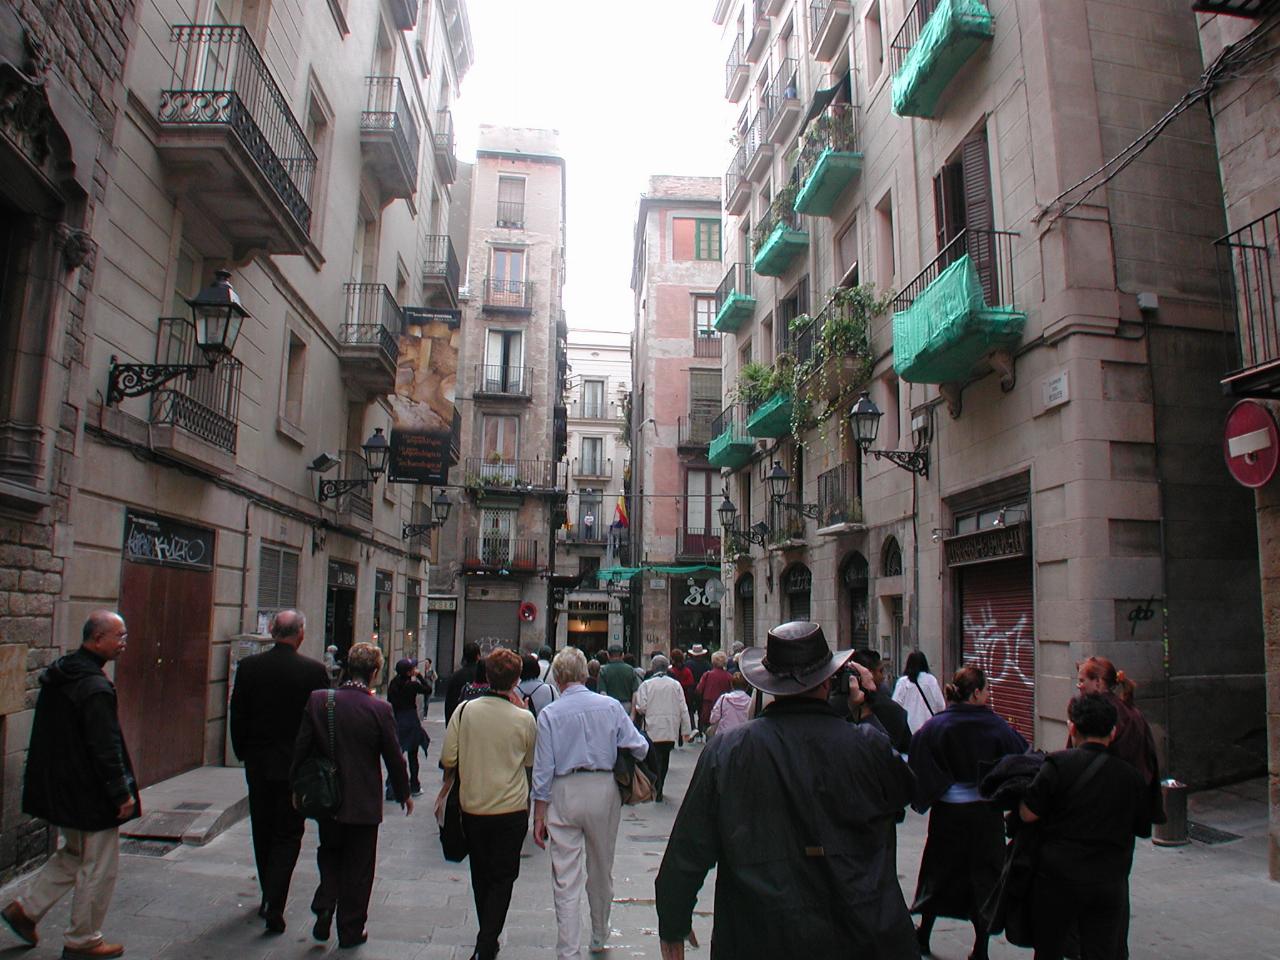 Tour group walking down a street in the old part of Barcelona